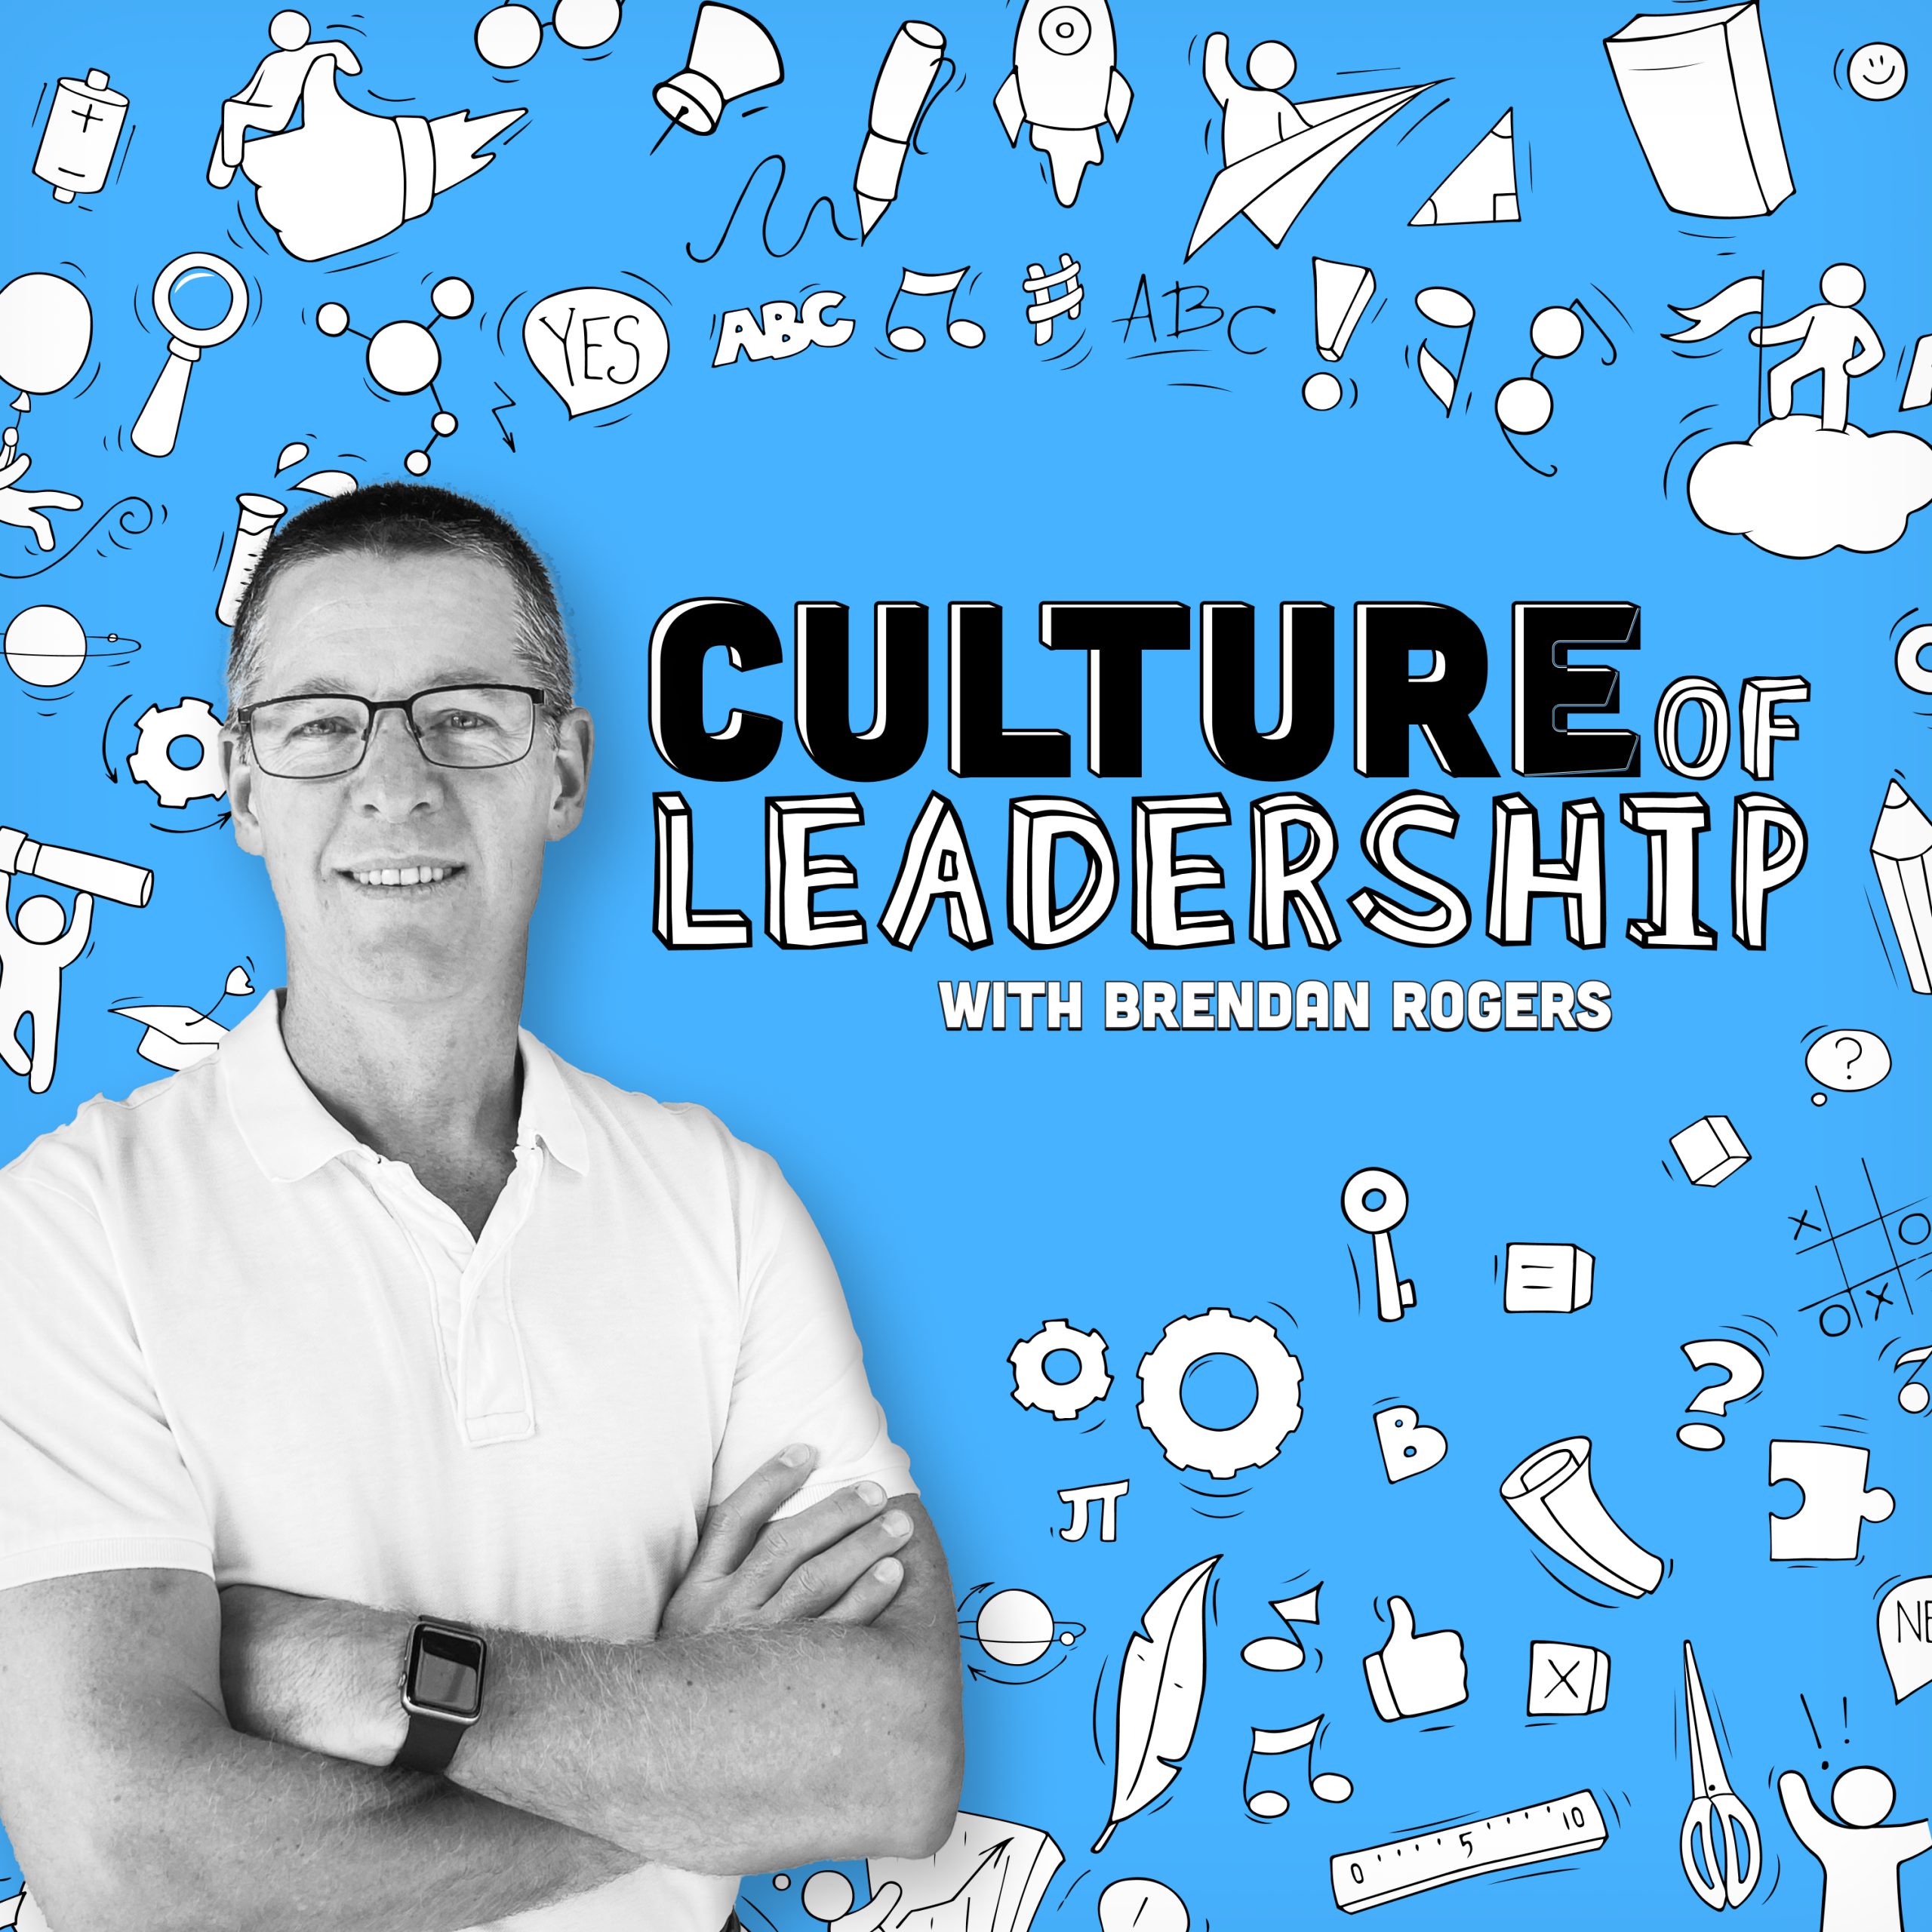 21. How to Build Organisational Culture